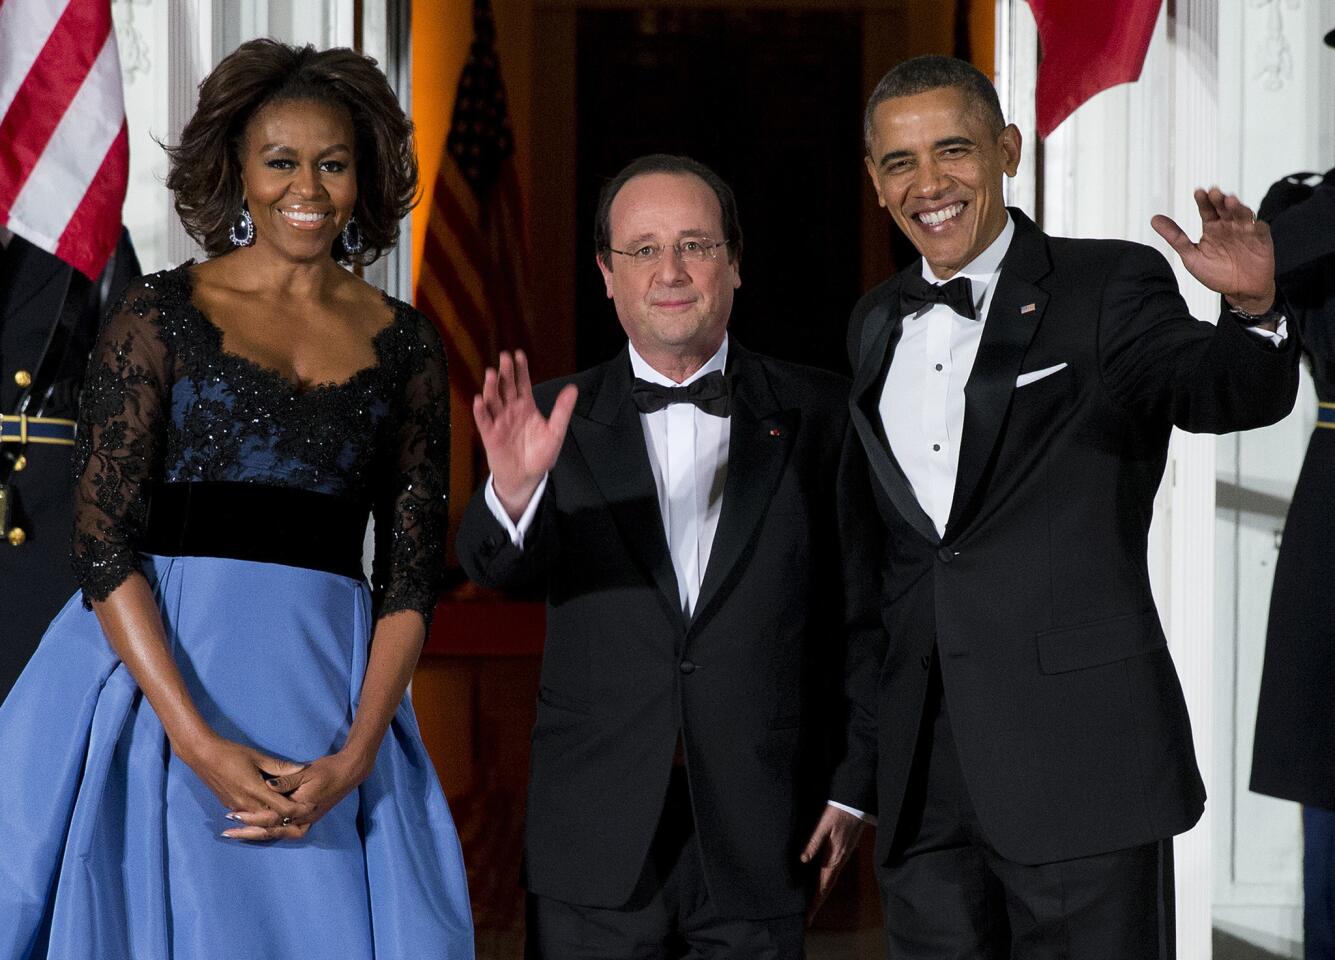 First lady Michelle Obama, left, and President Barack Obama welcome French President Francois Hollande for a State Dinner at the North Portico of the White House. The trip is taking place amid speculation about problems in Hollande's personal life.